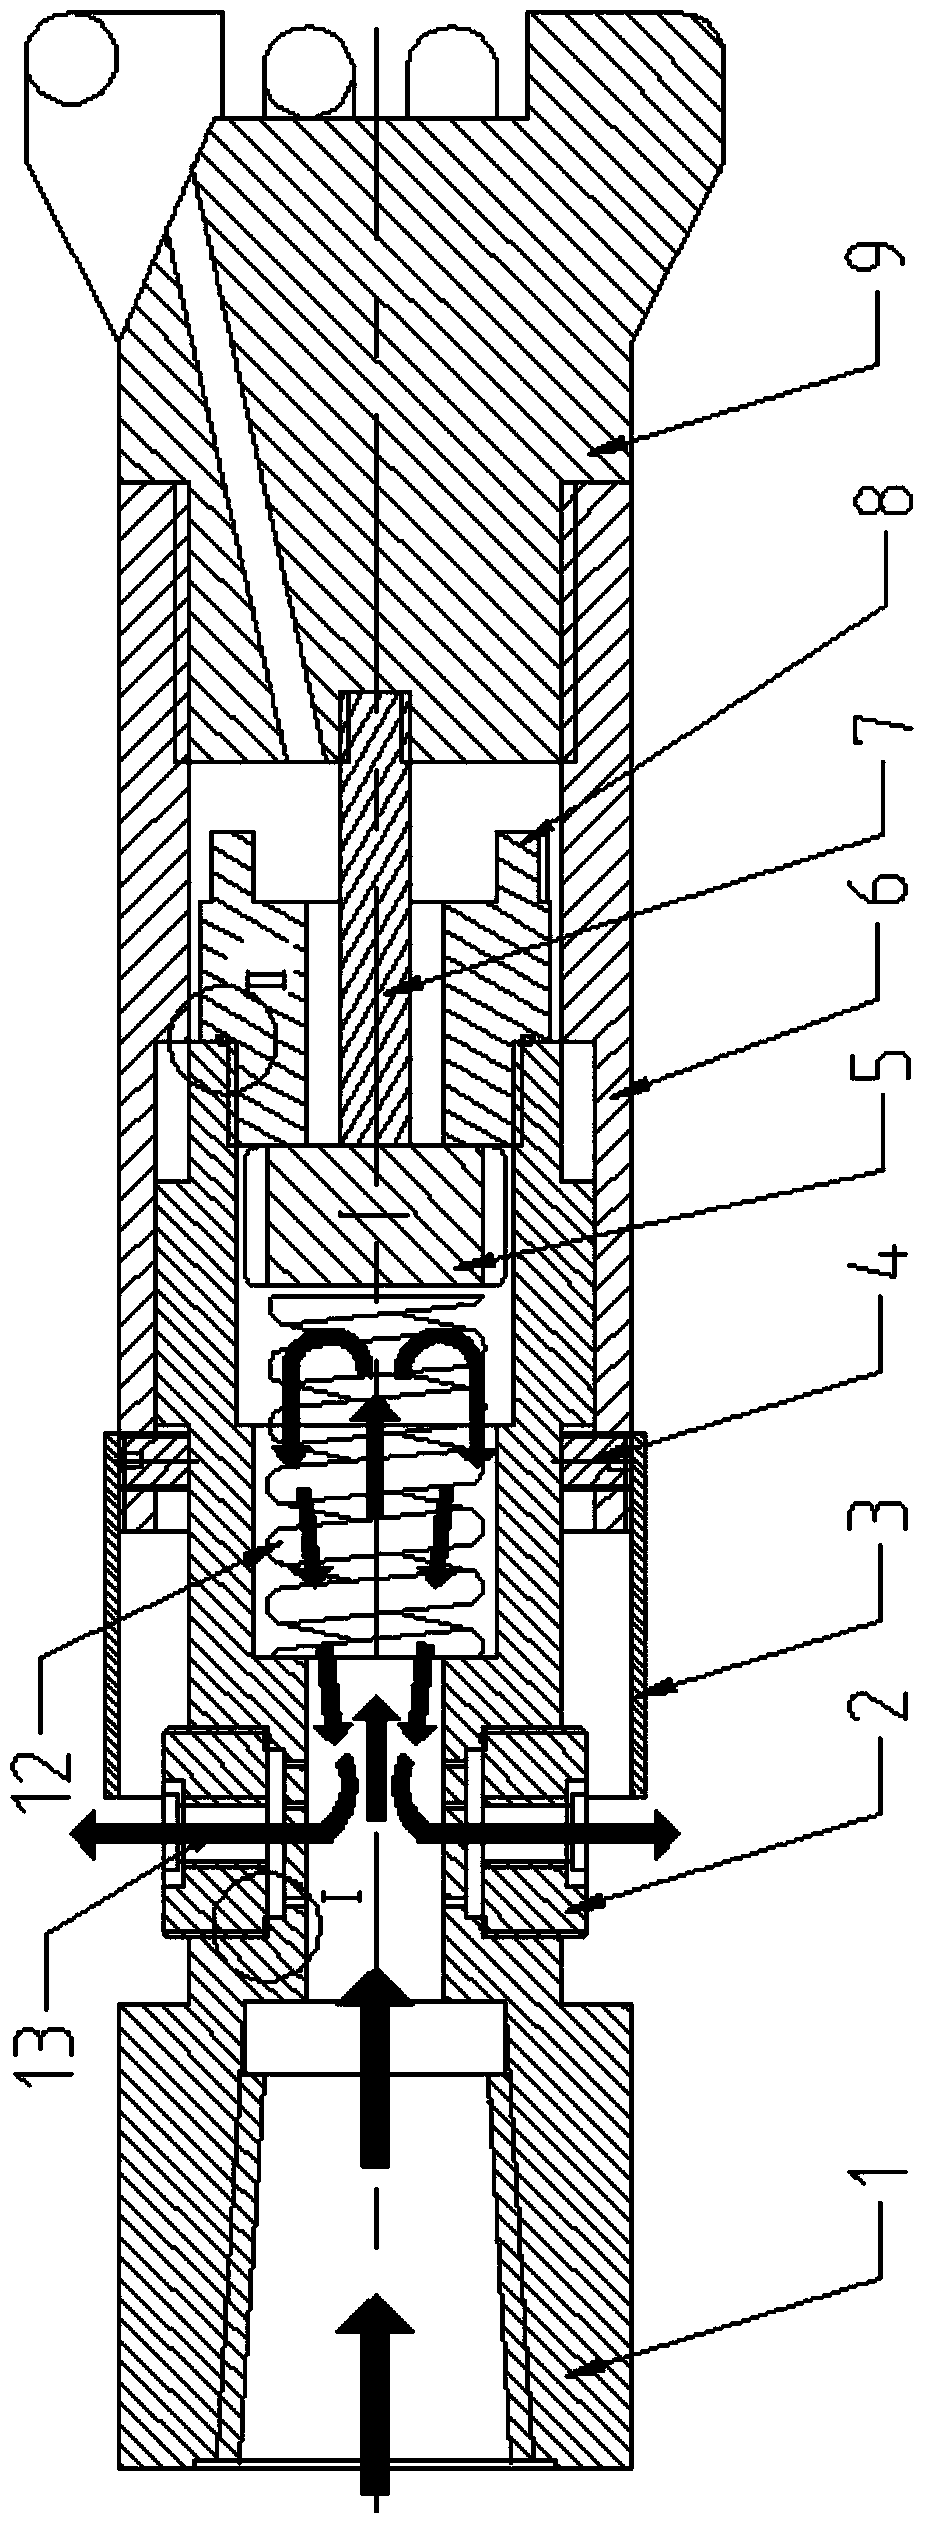 Mining drilling and cutting integrated drill bit